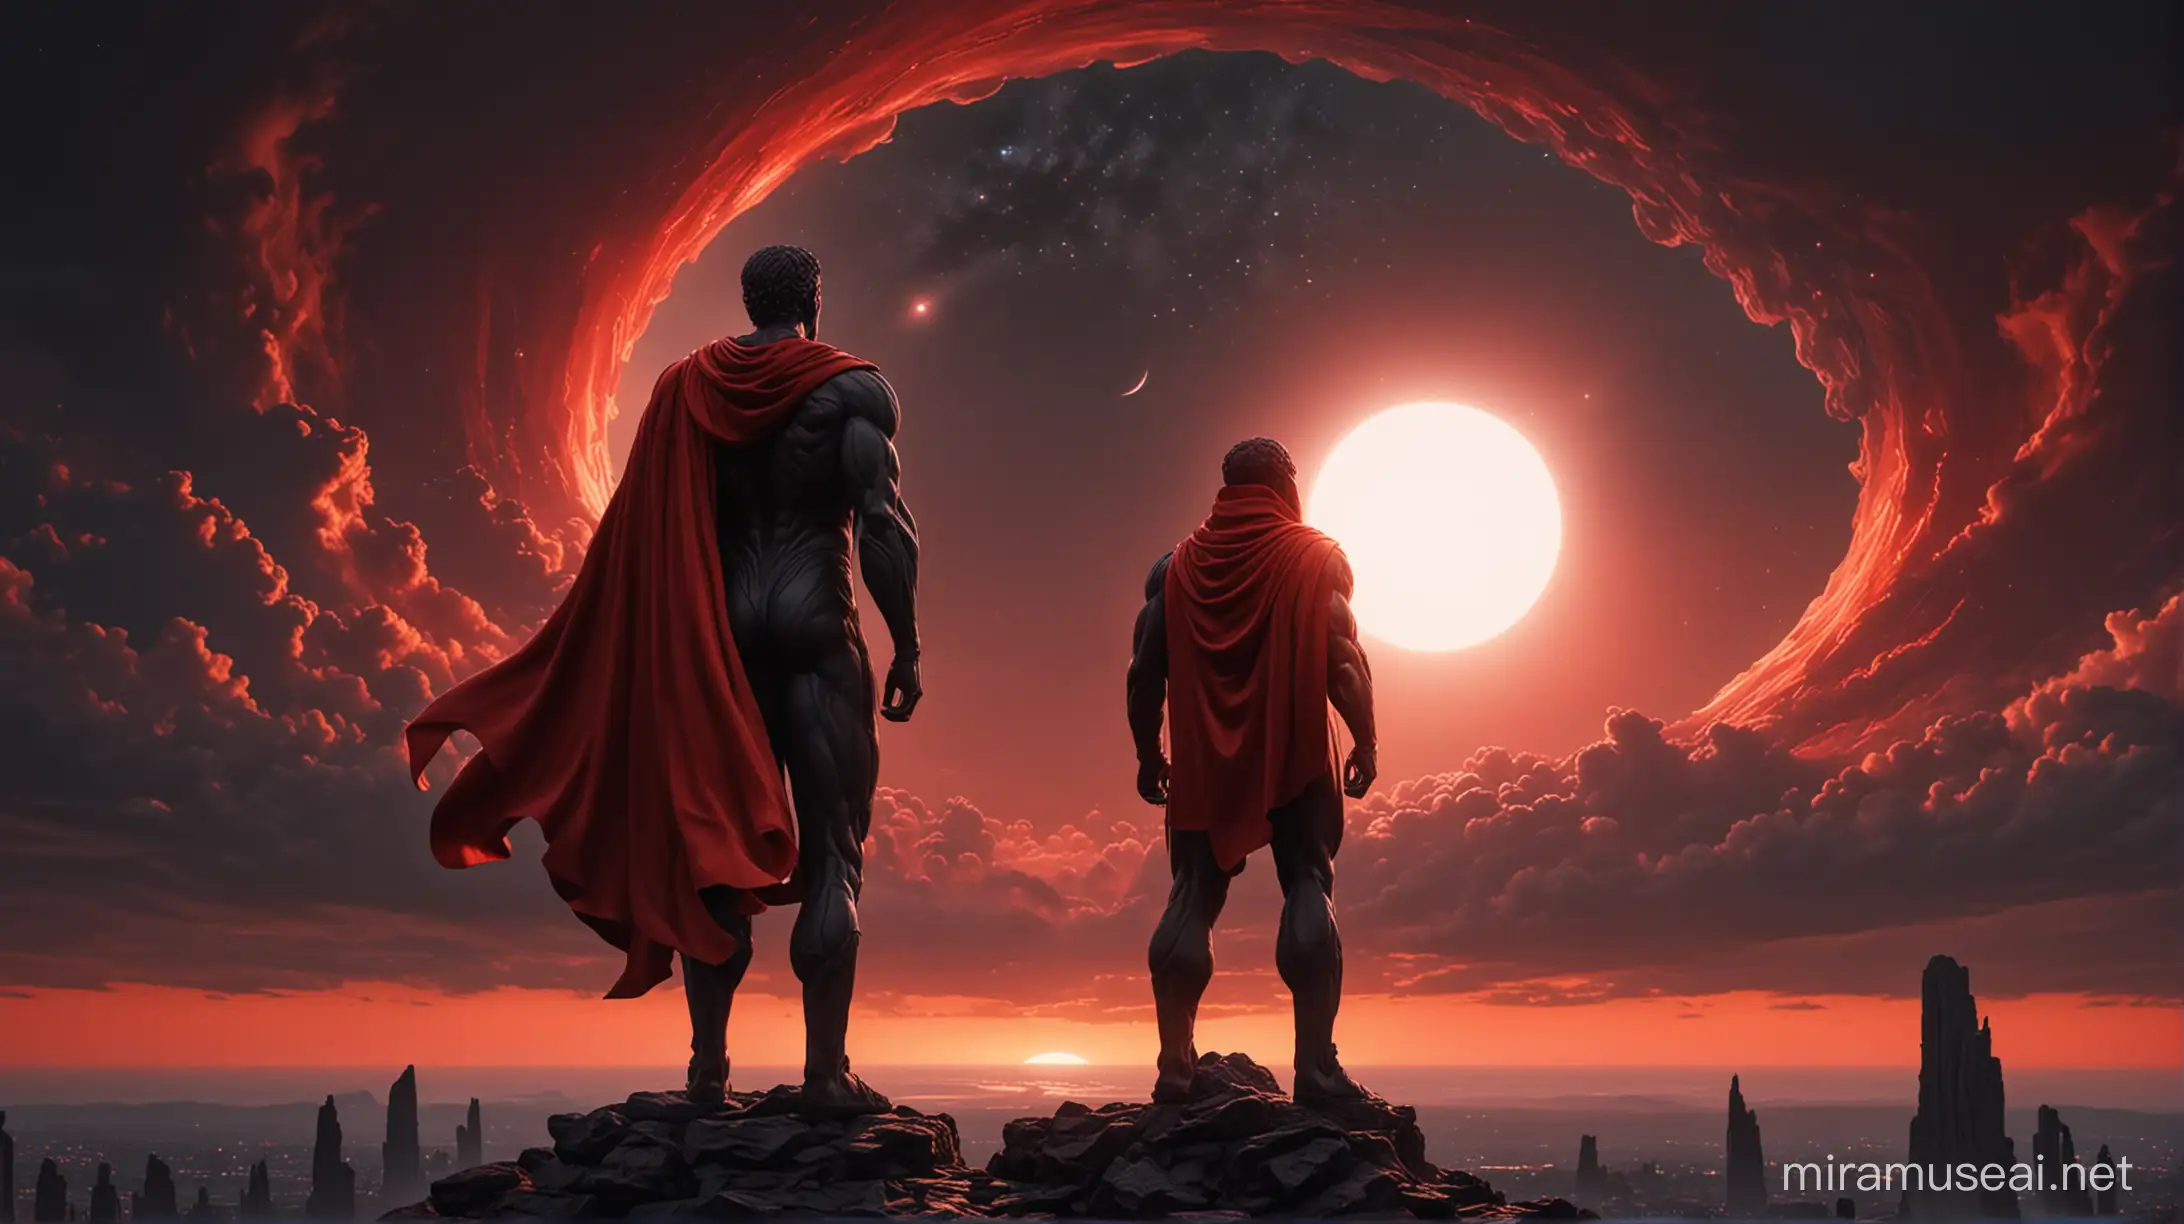 Stoicism, Motivation, stoic muscular statues outside , dark sunset,  looks at the sky and in the distance he sees a black hole, the sky is dark and has a red glow, the figure has a red cape